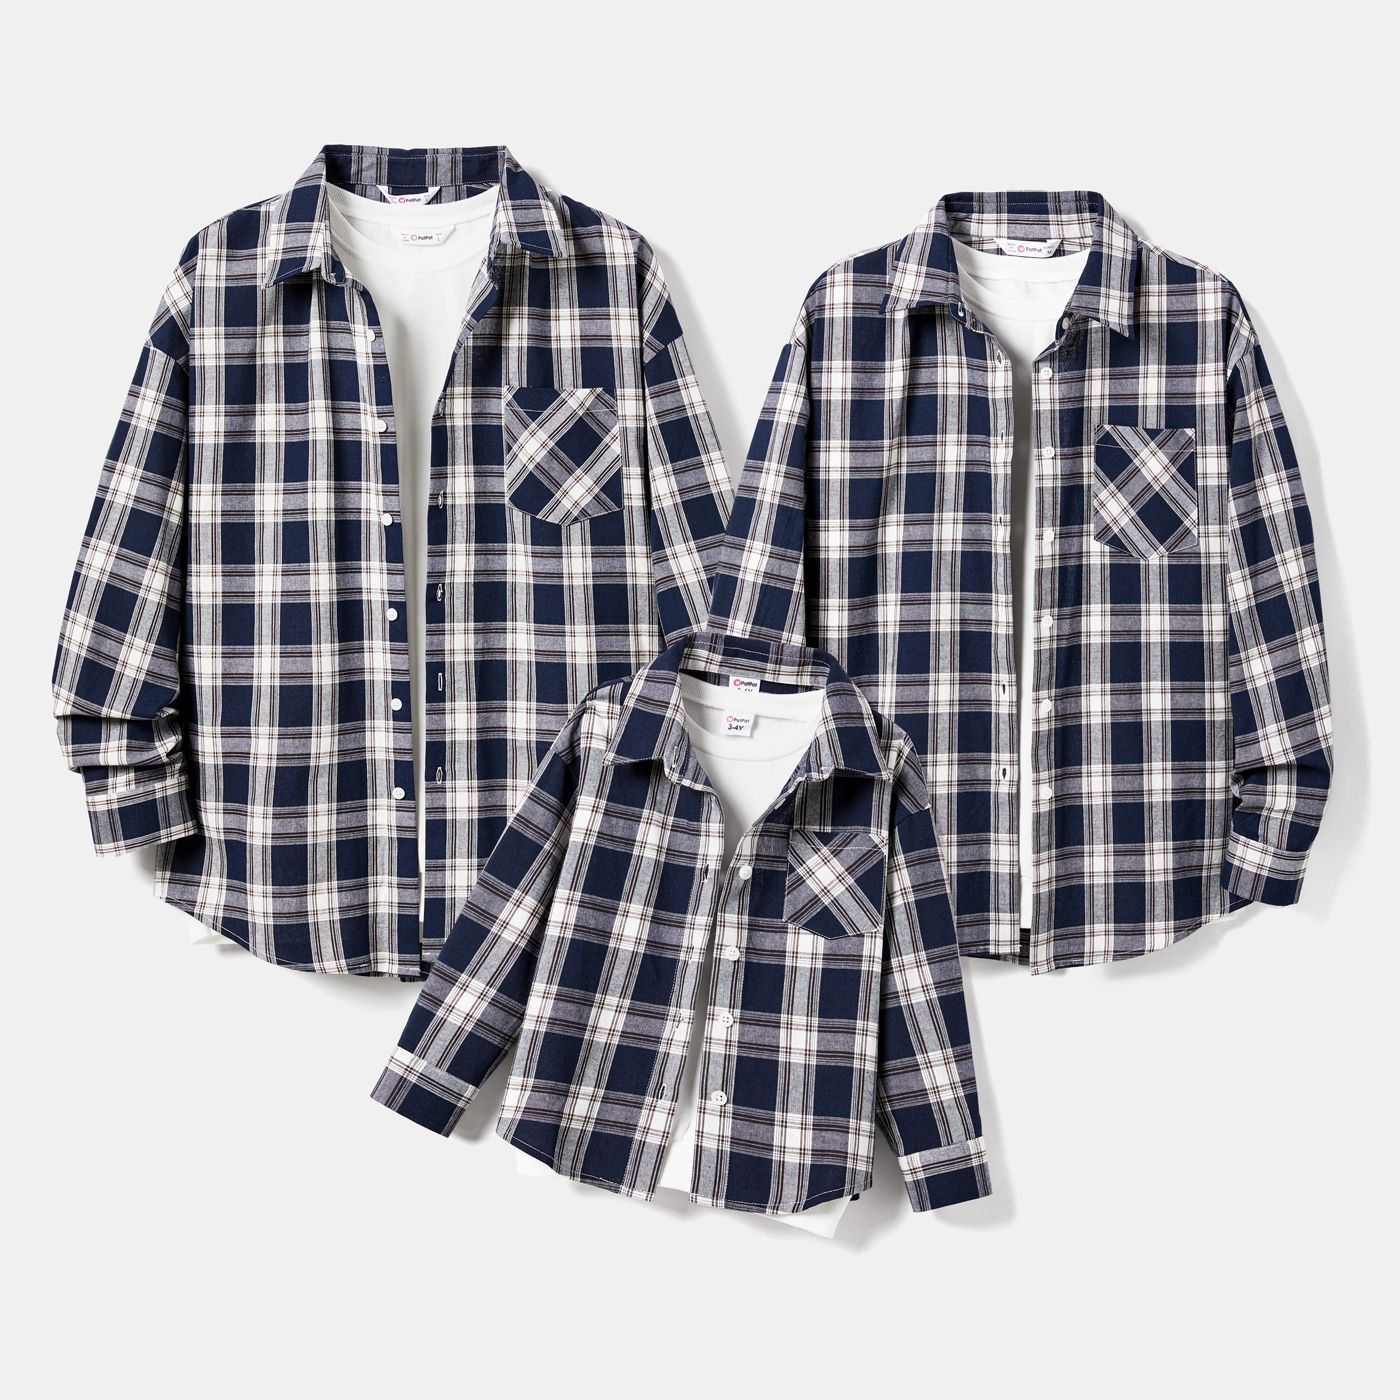 Family Matching Casual Cotton Plaid Long-sleeve Shirt Tops